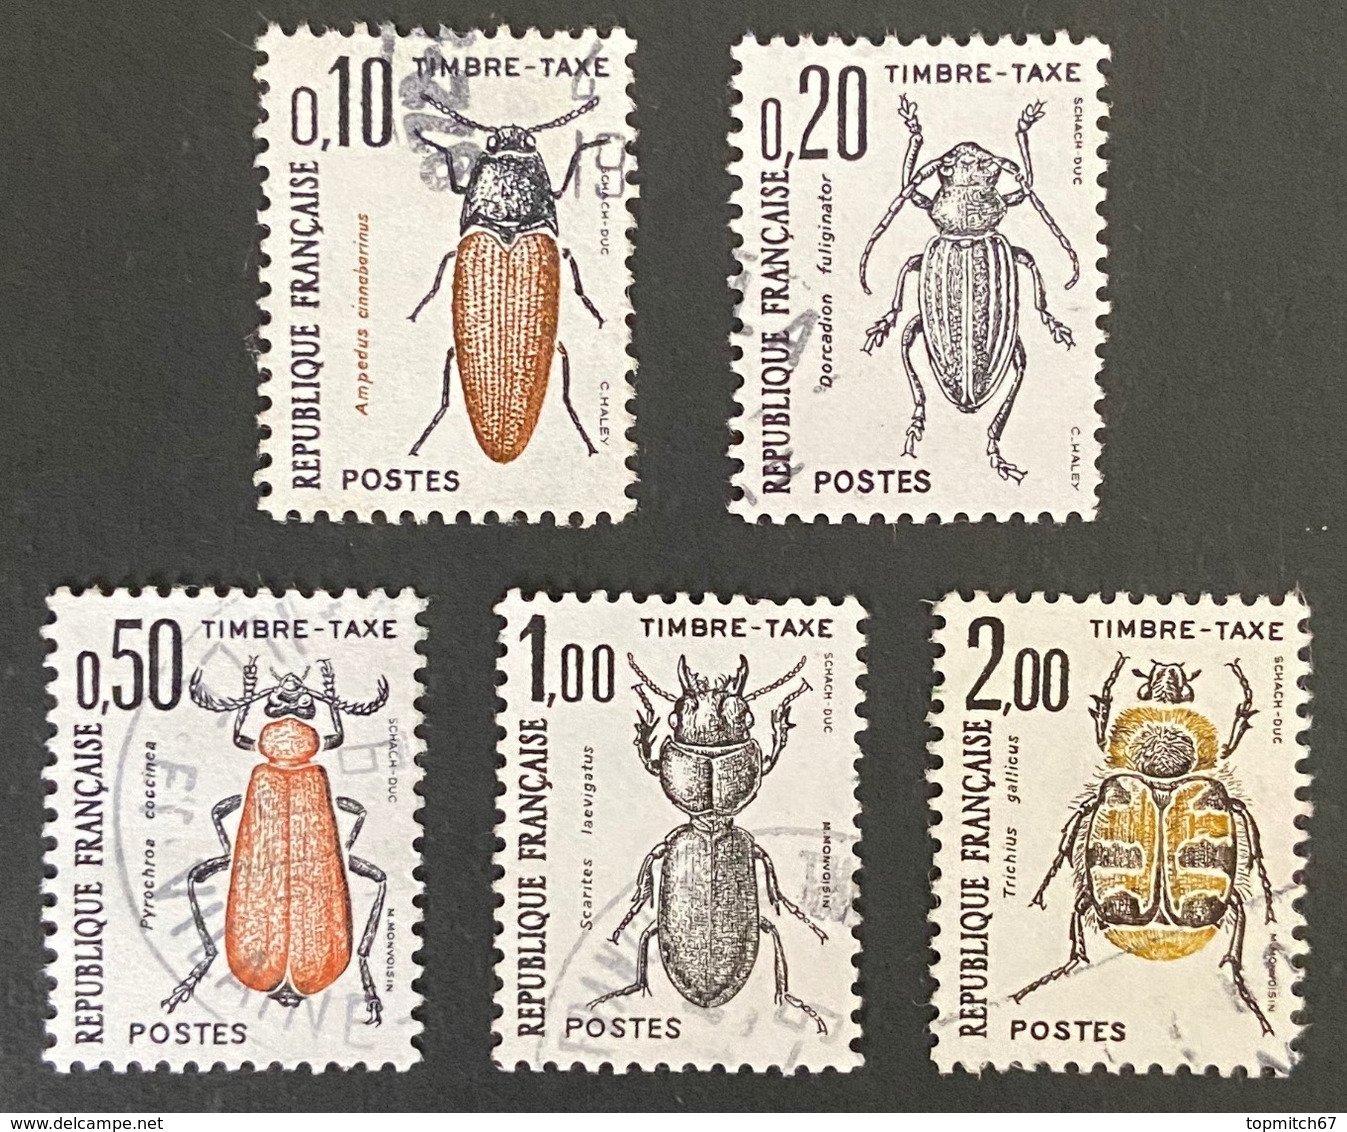 FRAYX103-07U - Timbres Taxe Insectes Coléoptères (I) Set Of 5 Used Stamps 1982 - France YT YX 103-07 - Timbres